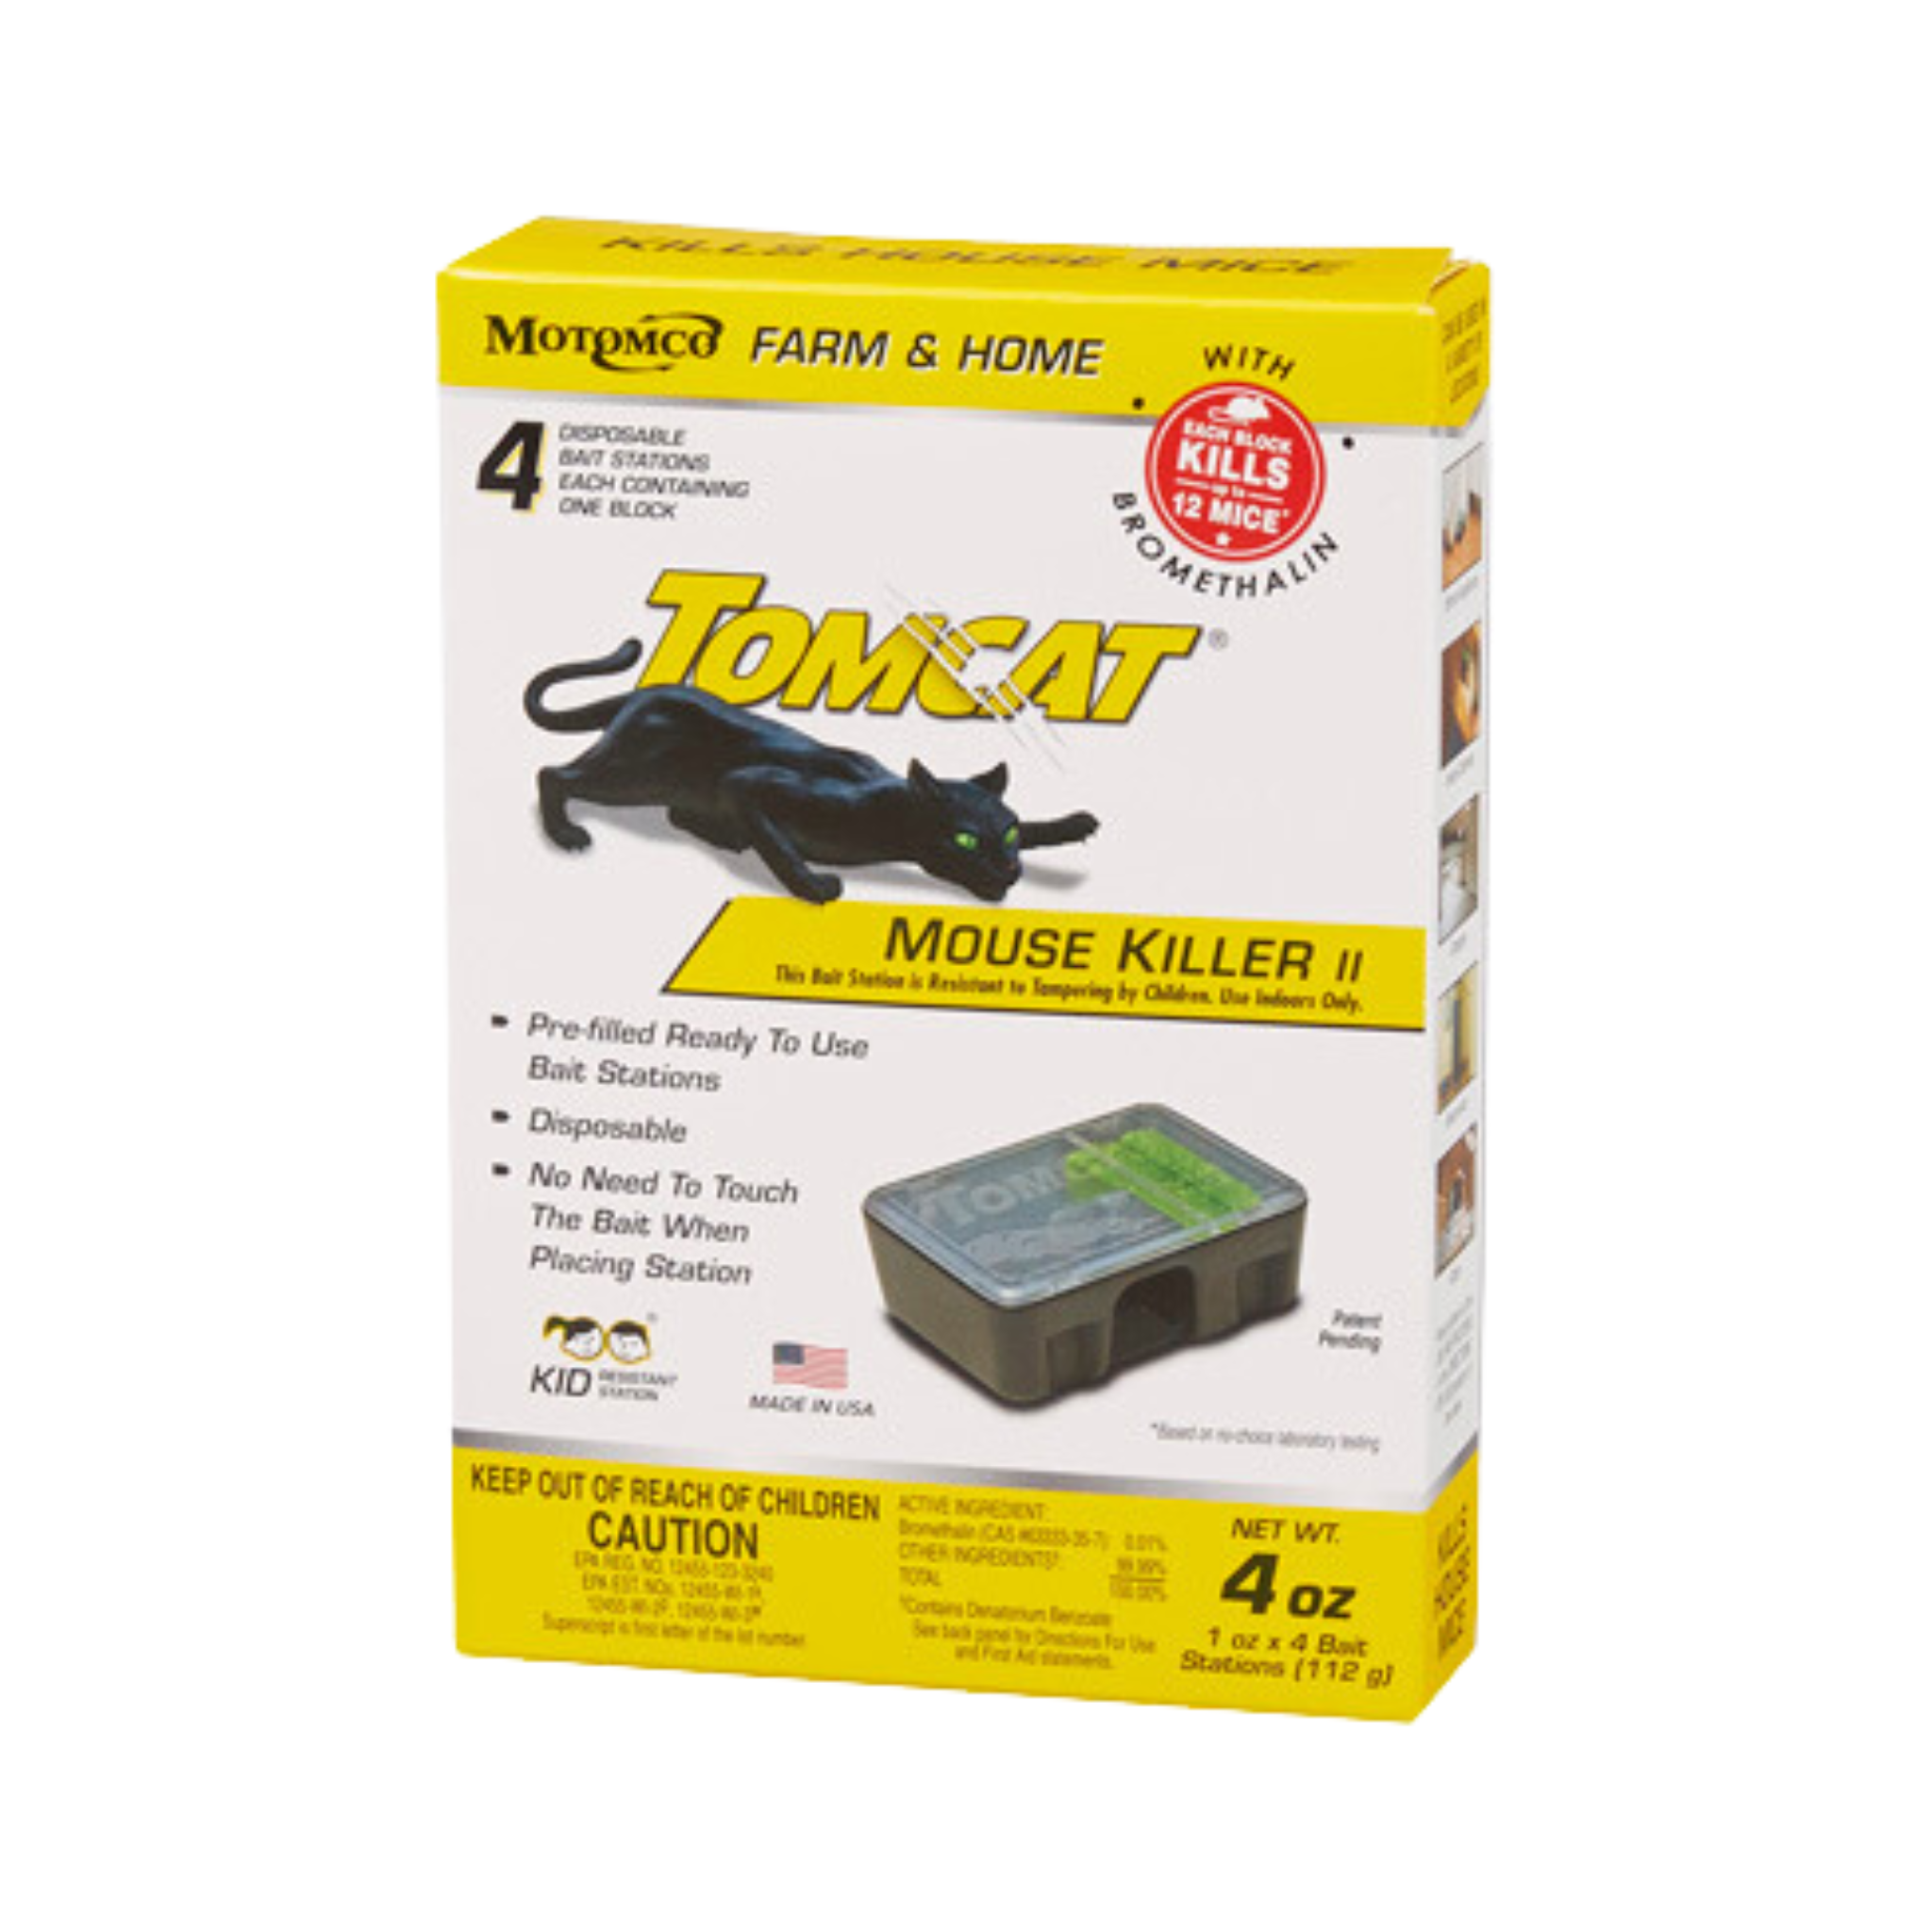 TOMCAT MOUSE KILLER III BAIT STATION WITH REFILLS 4 PACK